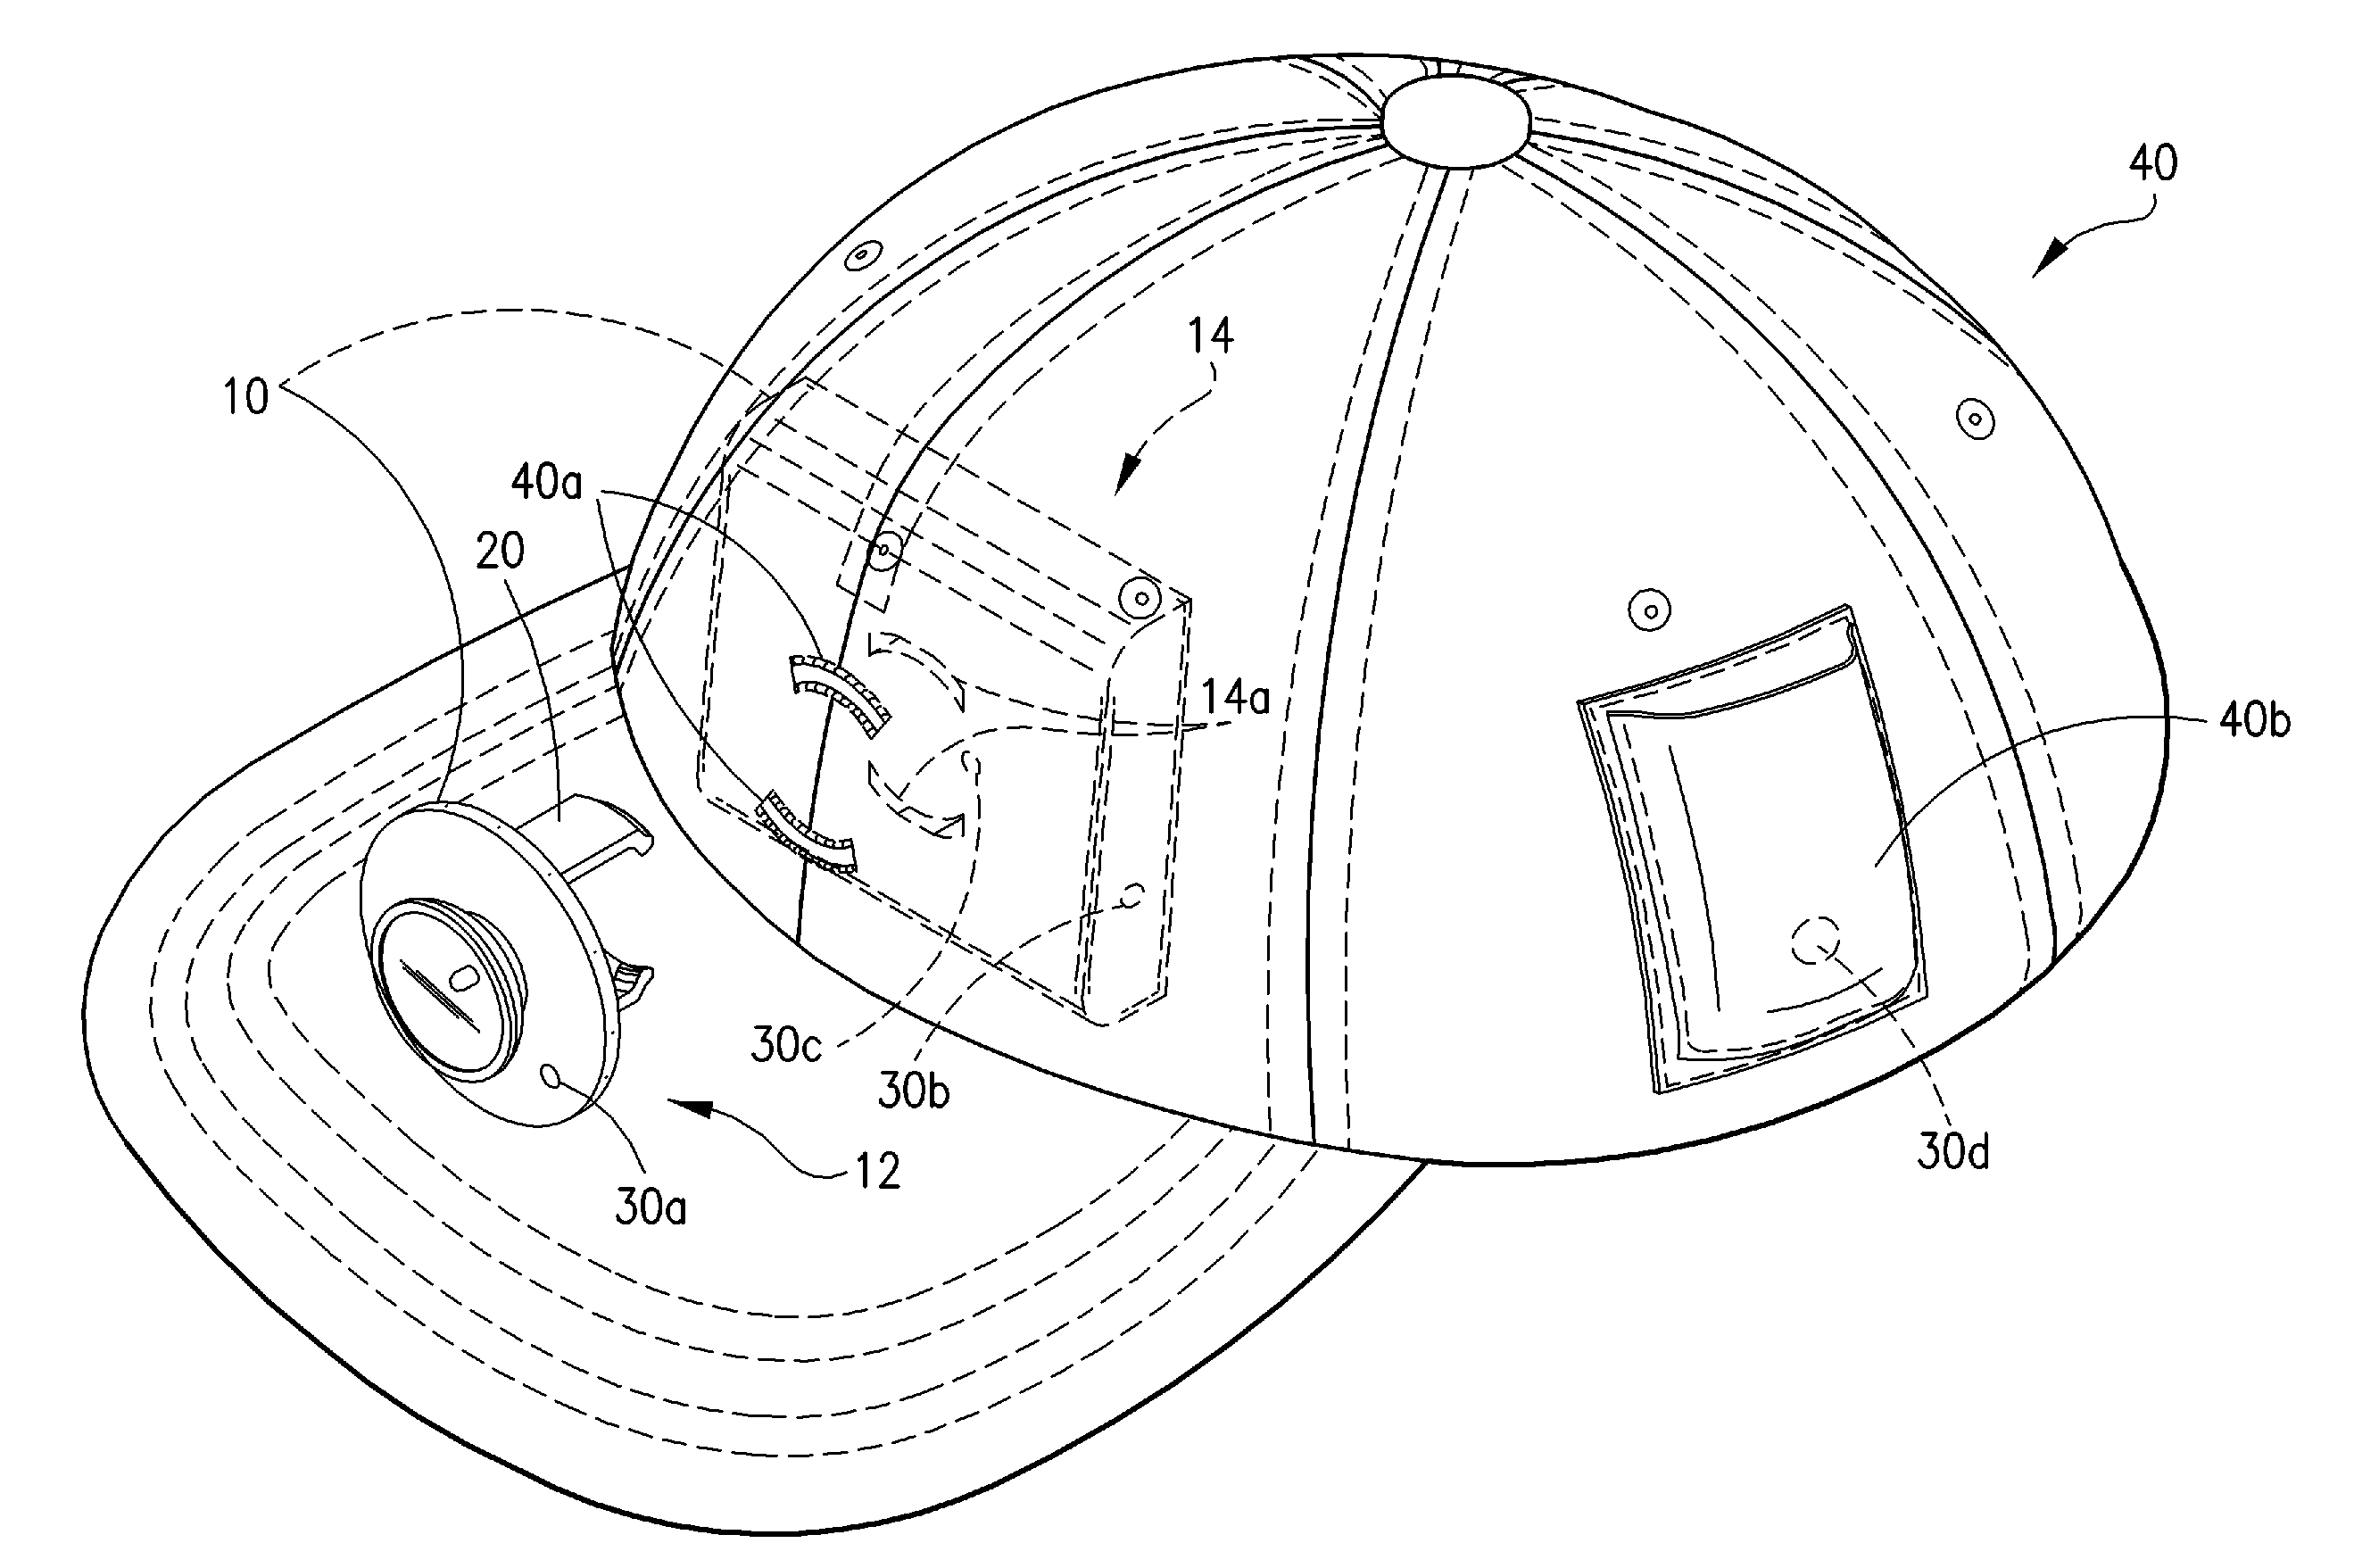 Illumination device mountable through an aperture in a clothing object